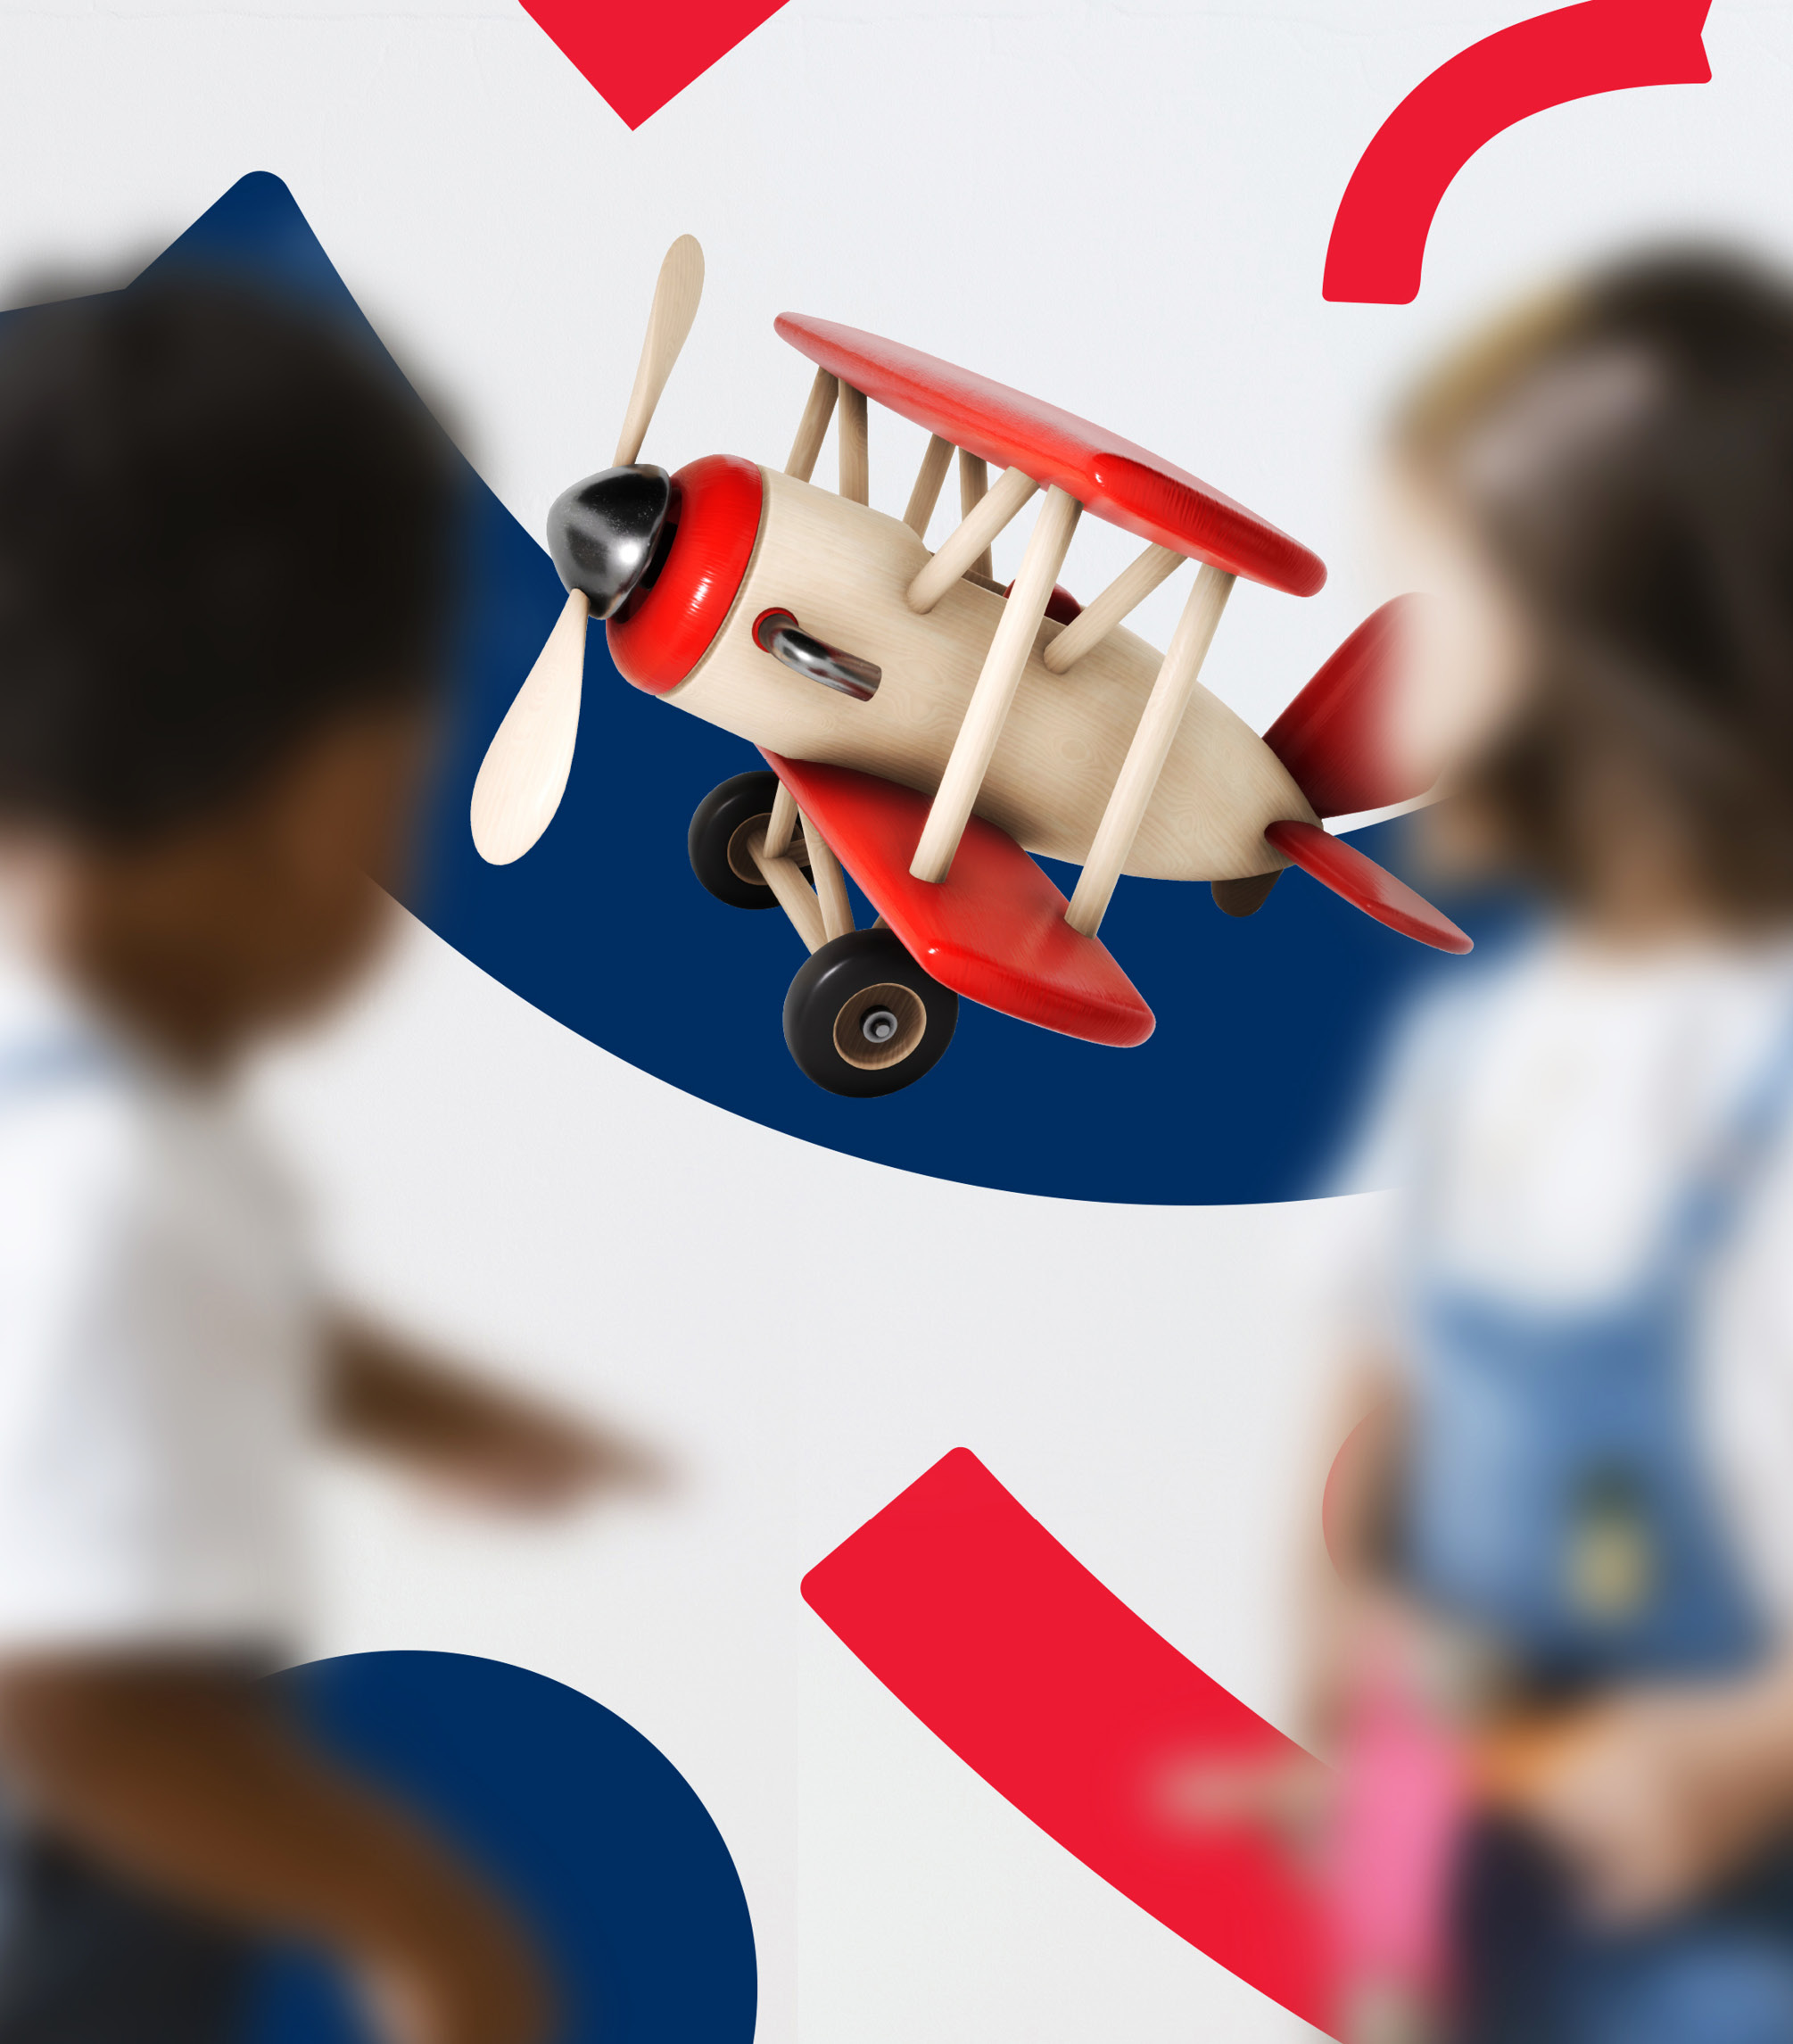 RAFA Kidz brand image showing small wooden propeller plane and two kids along with bright graphics in red and navy blue